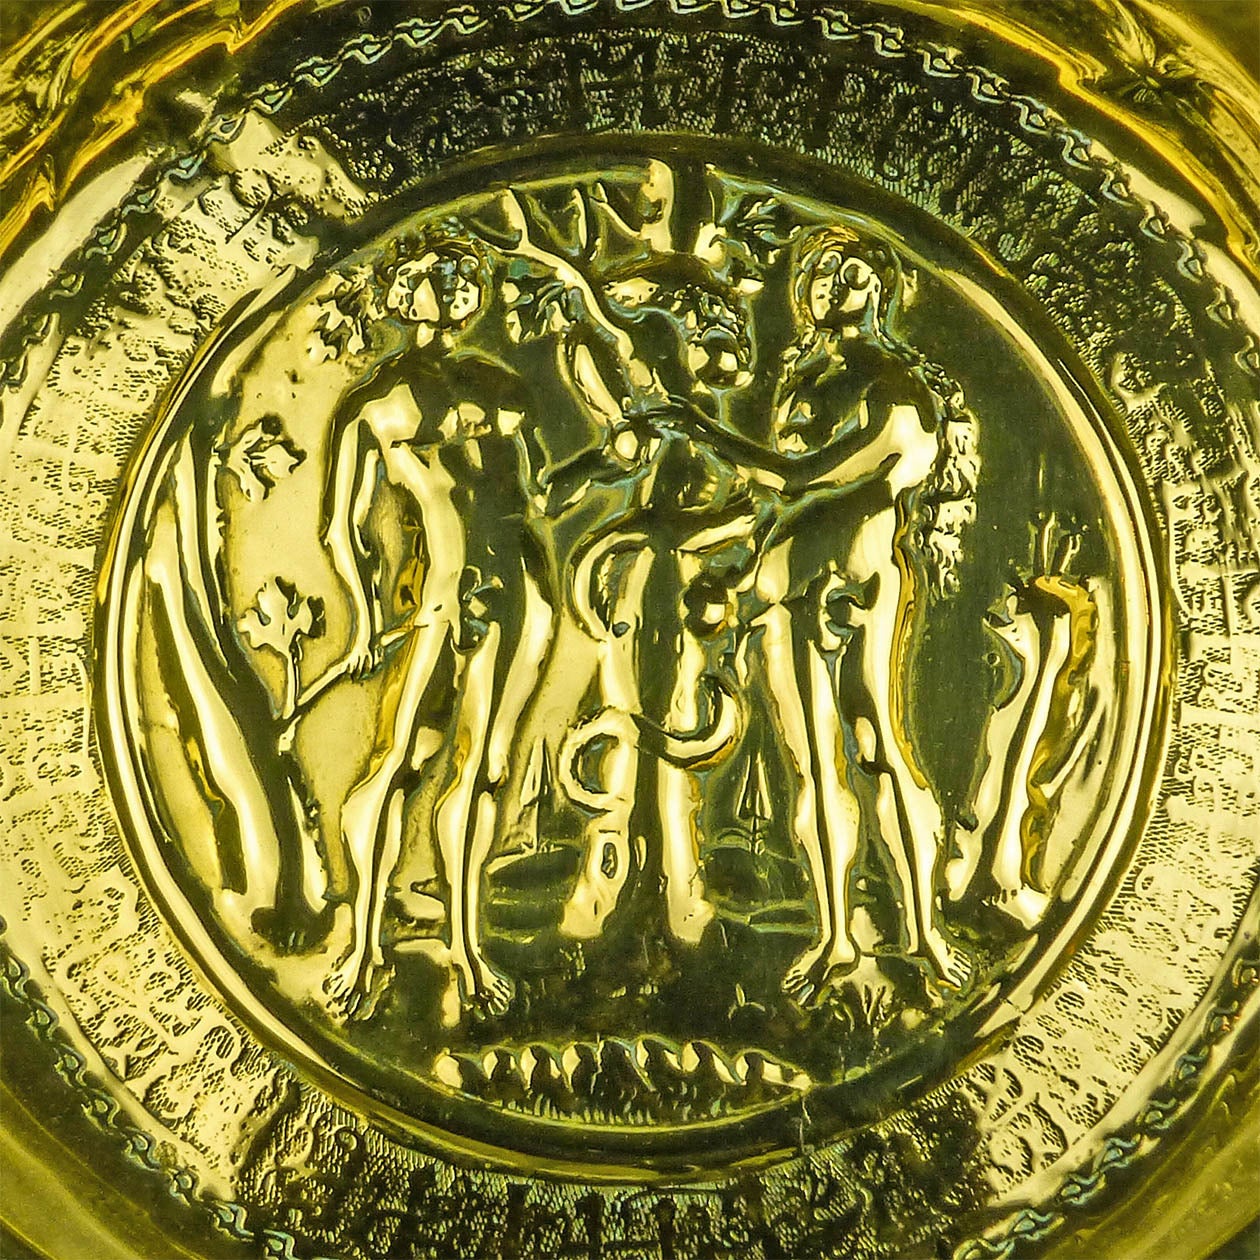 German brass alms dish, circa 1500.

Gothic period dish/basin. This deep basin is depicting Adam and Eve, “The Fall of Man.” Fabulous condition.

Dimensions: Diameter 12 1/2, depth 3.